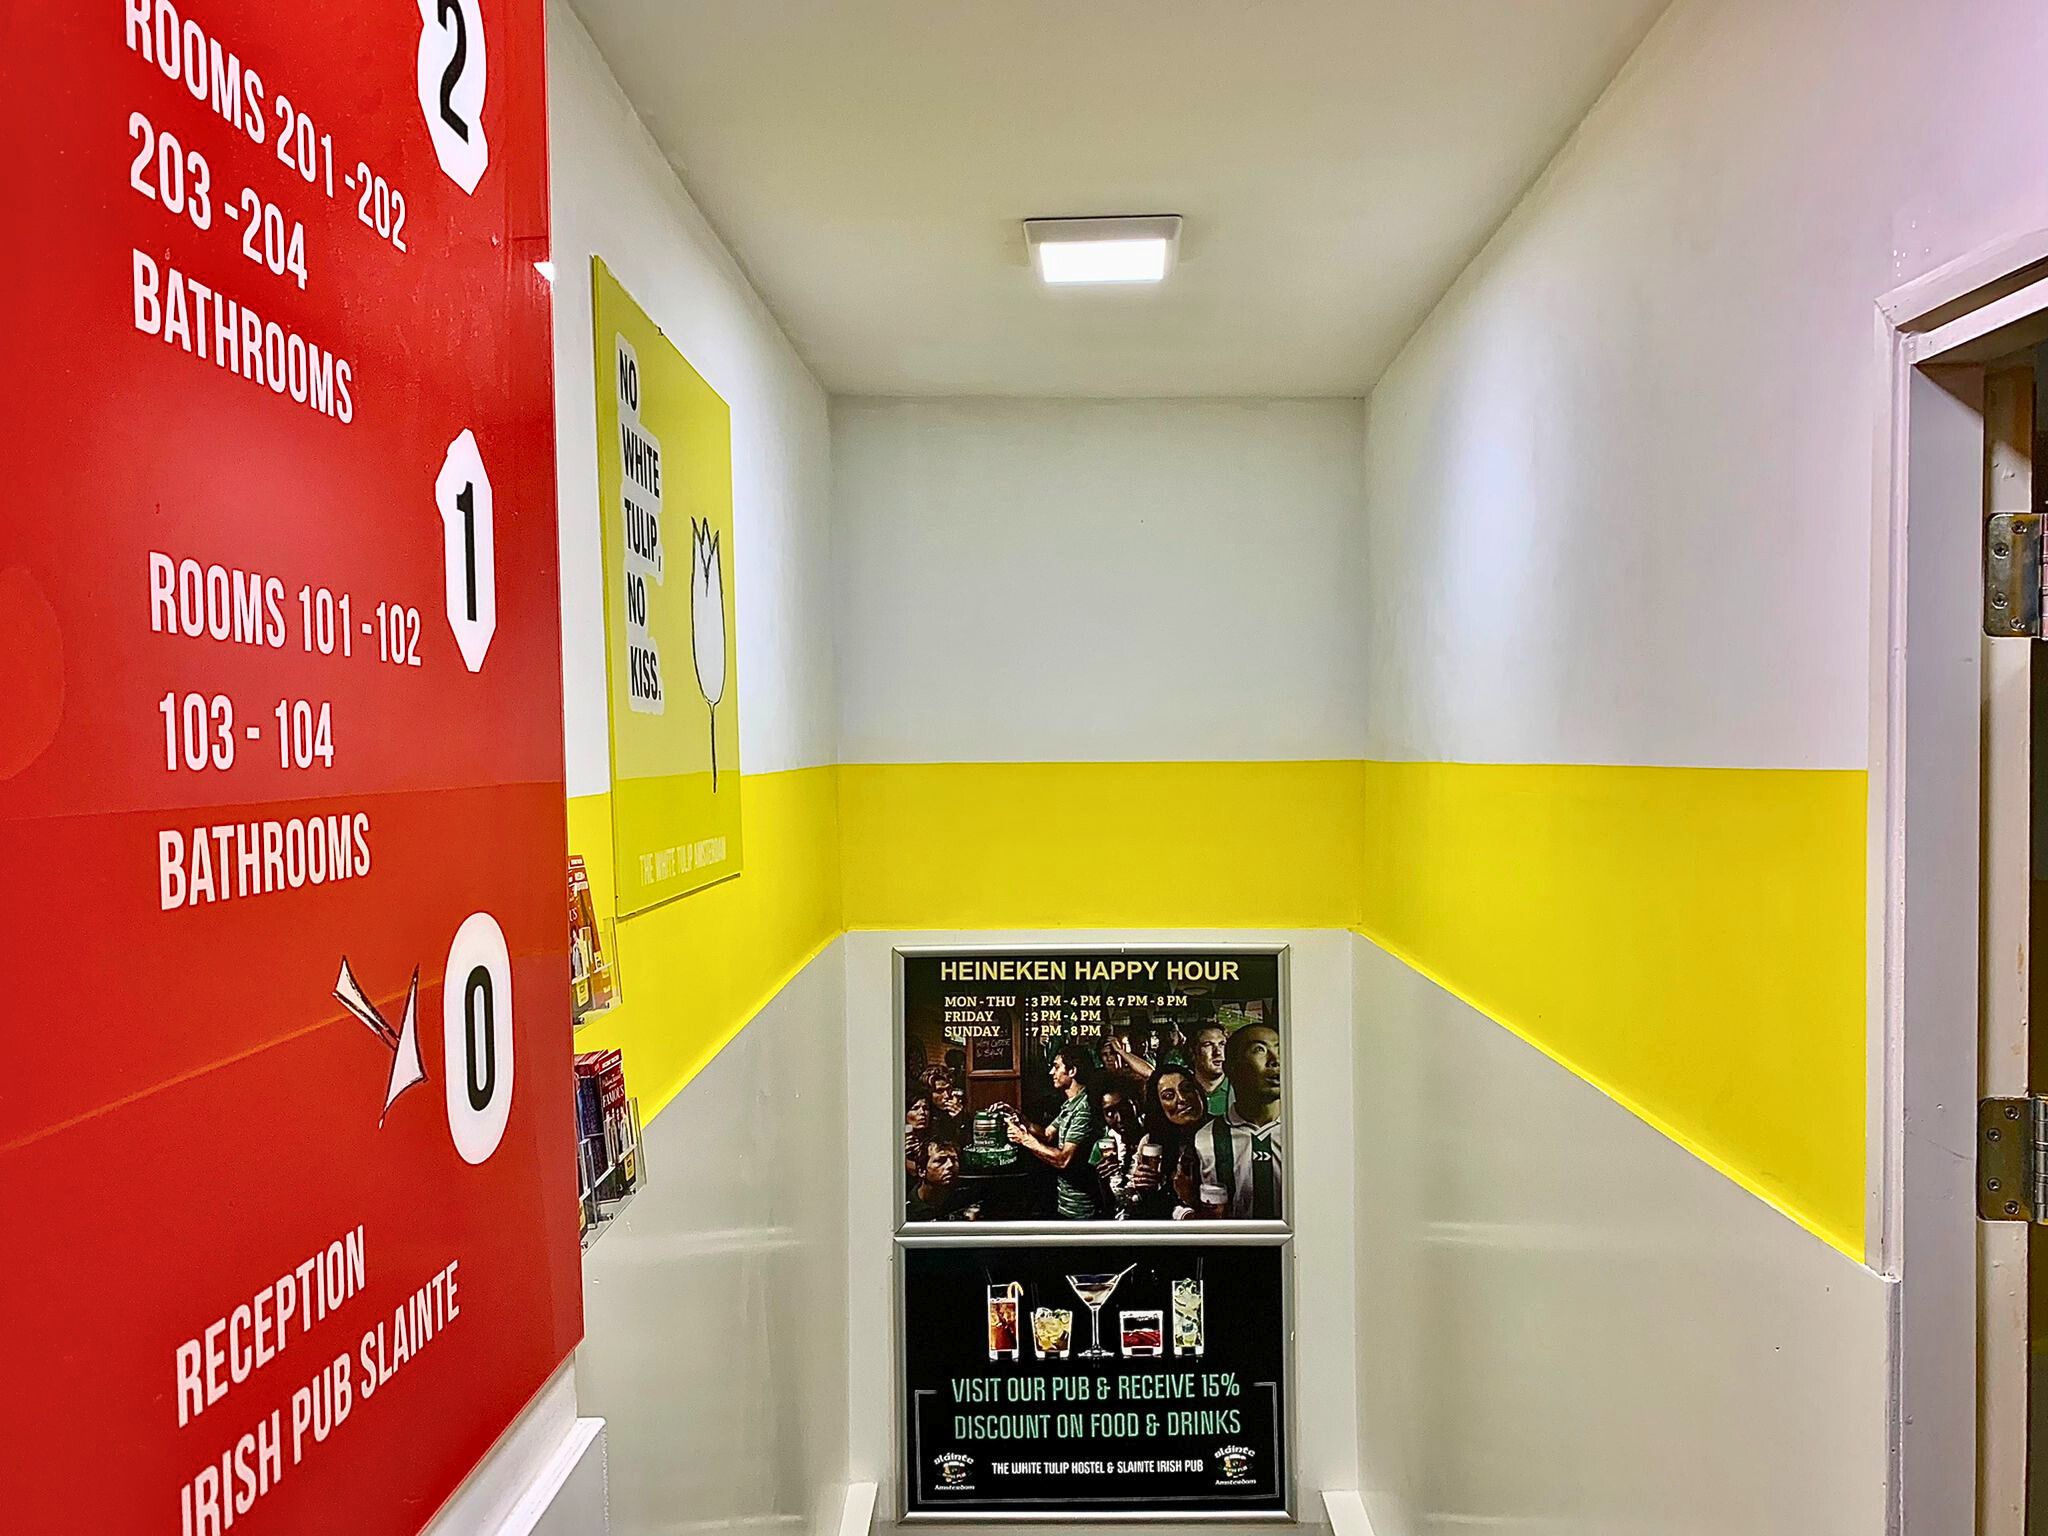 A brightly colored corridor with directional signage. To the left, a red wall with white text indicating room numbers and facilities on different floors; ahead, a poster for Heineken Happy Hour; and to the right, a yellow wall with a playful text poster.